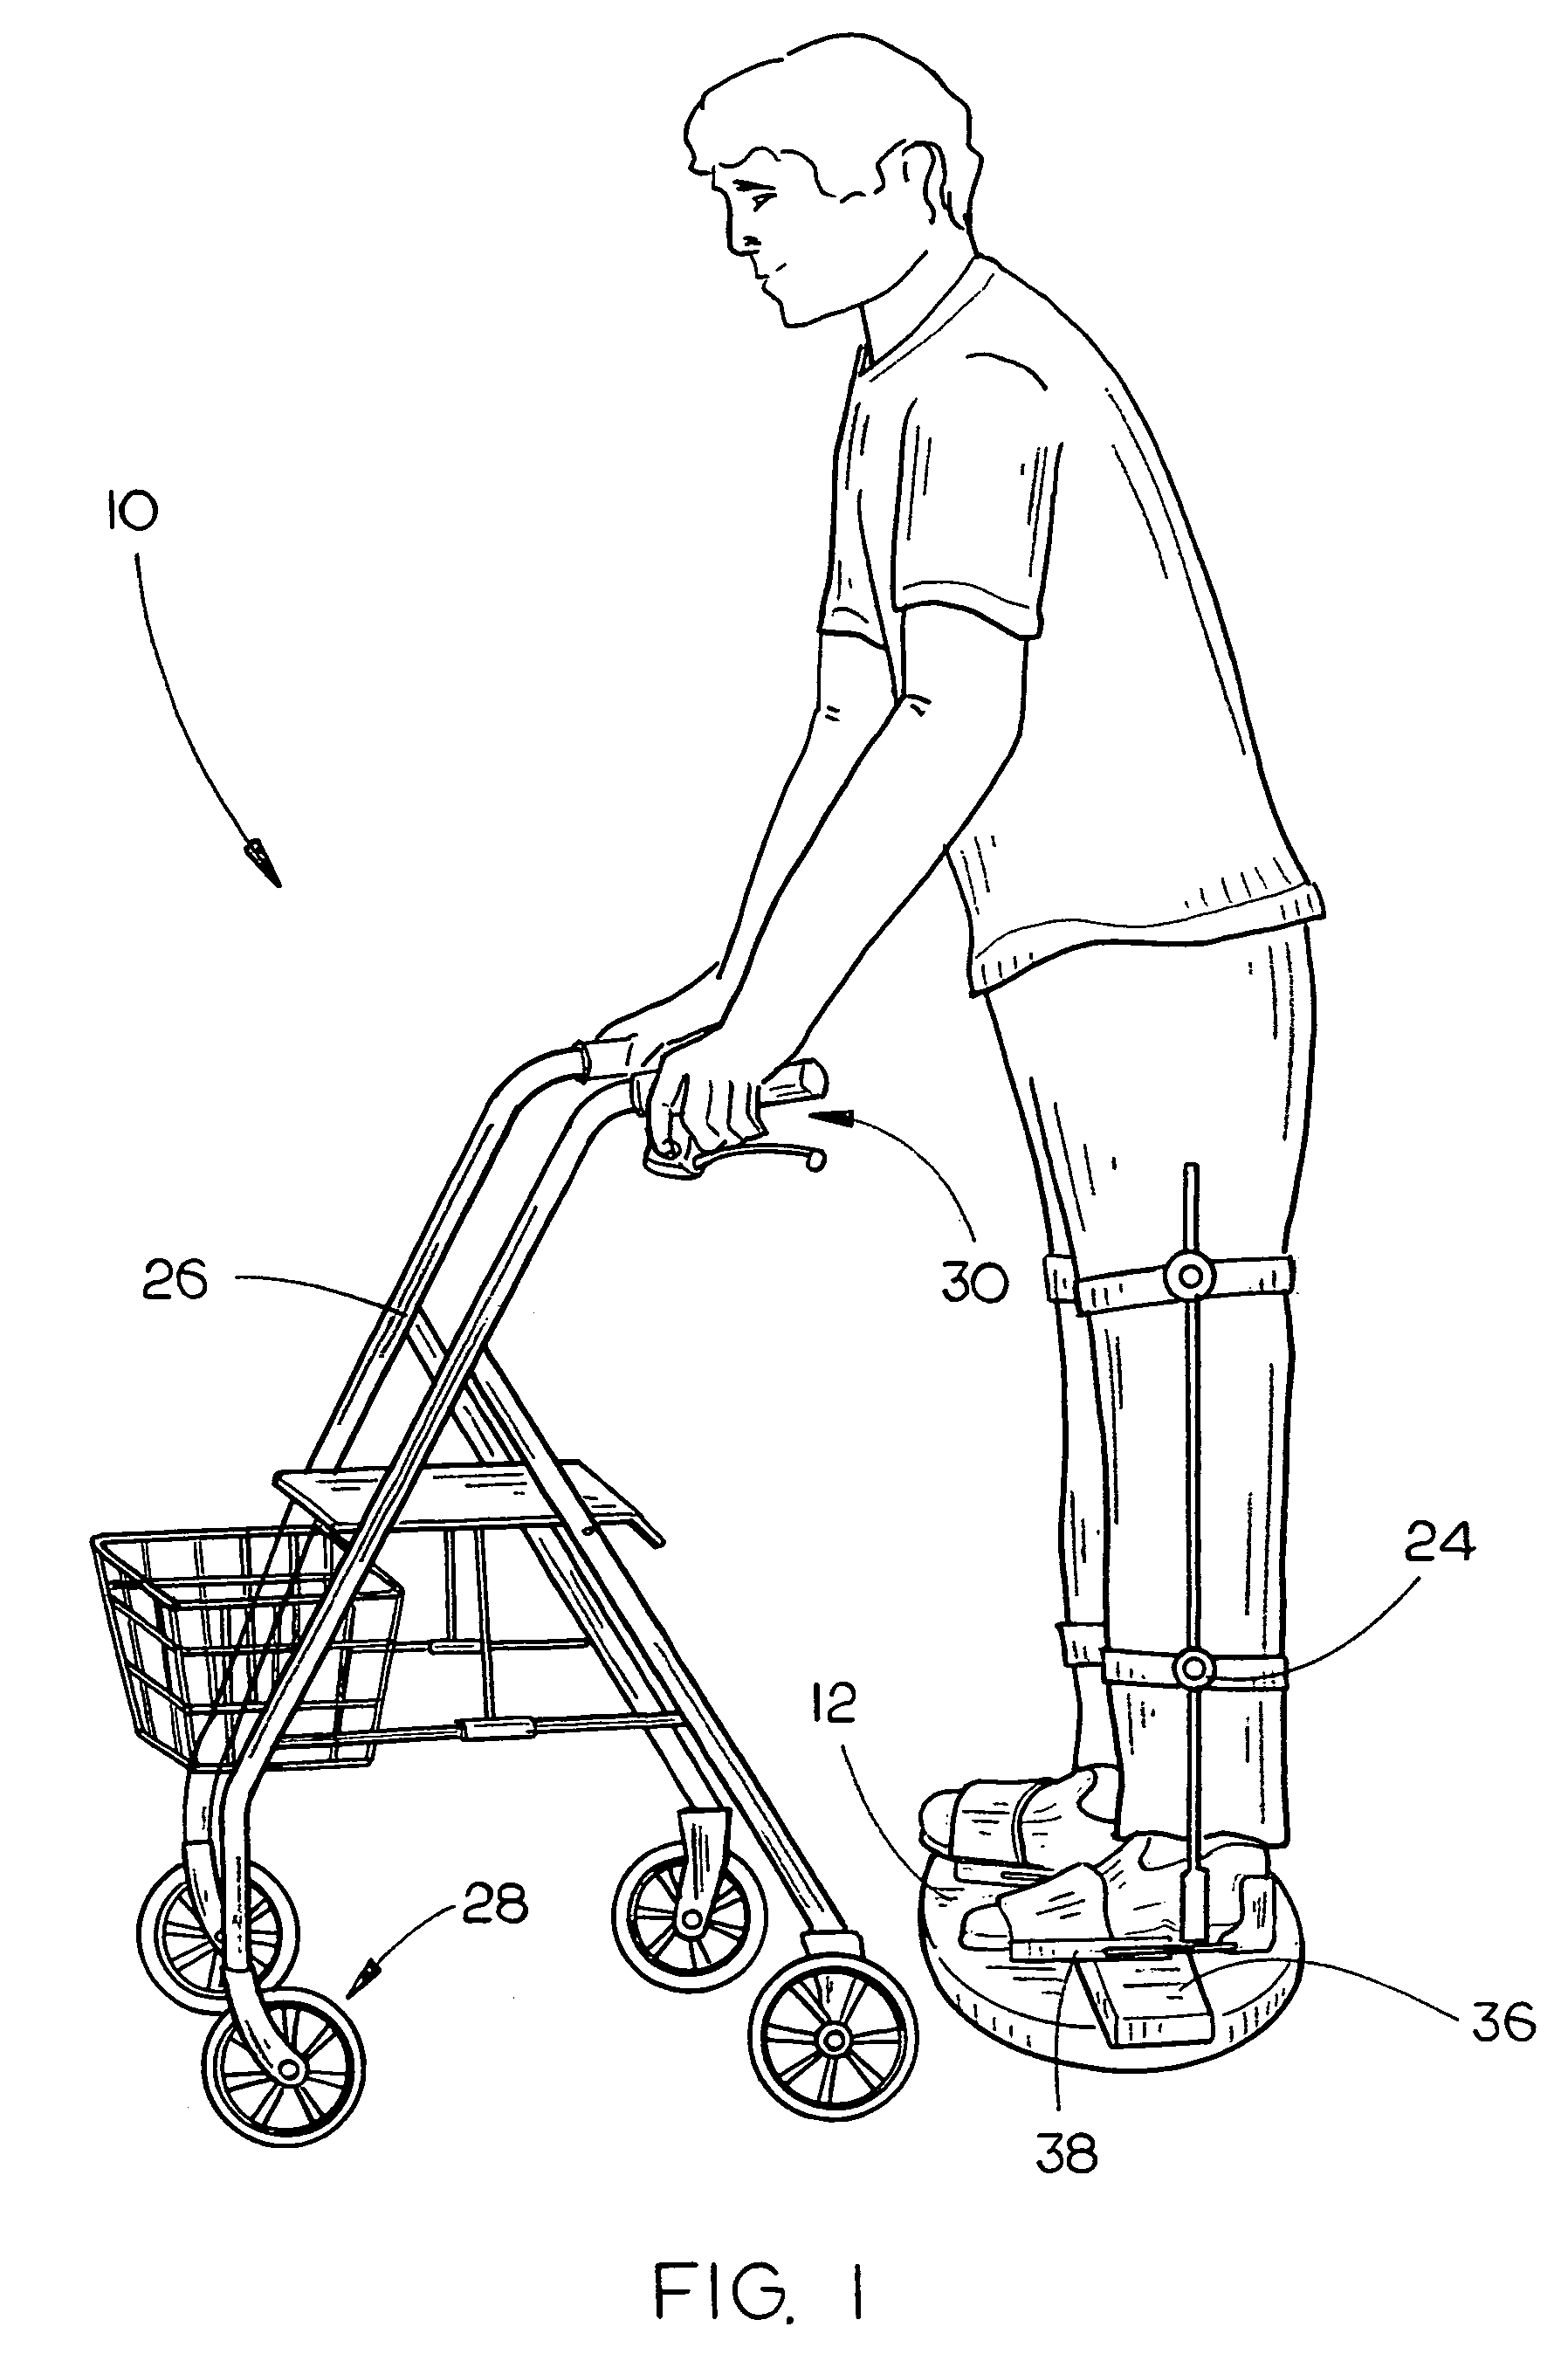 Method and system for assisting individual ambulation